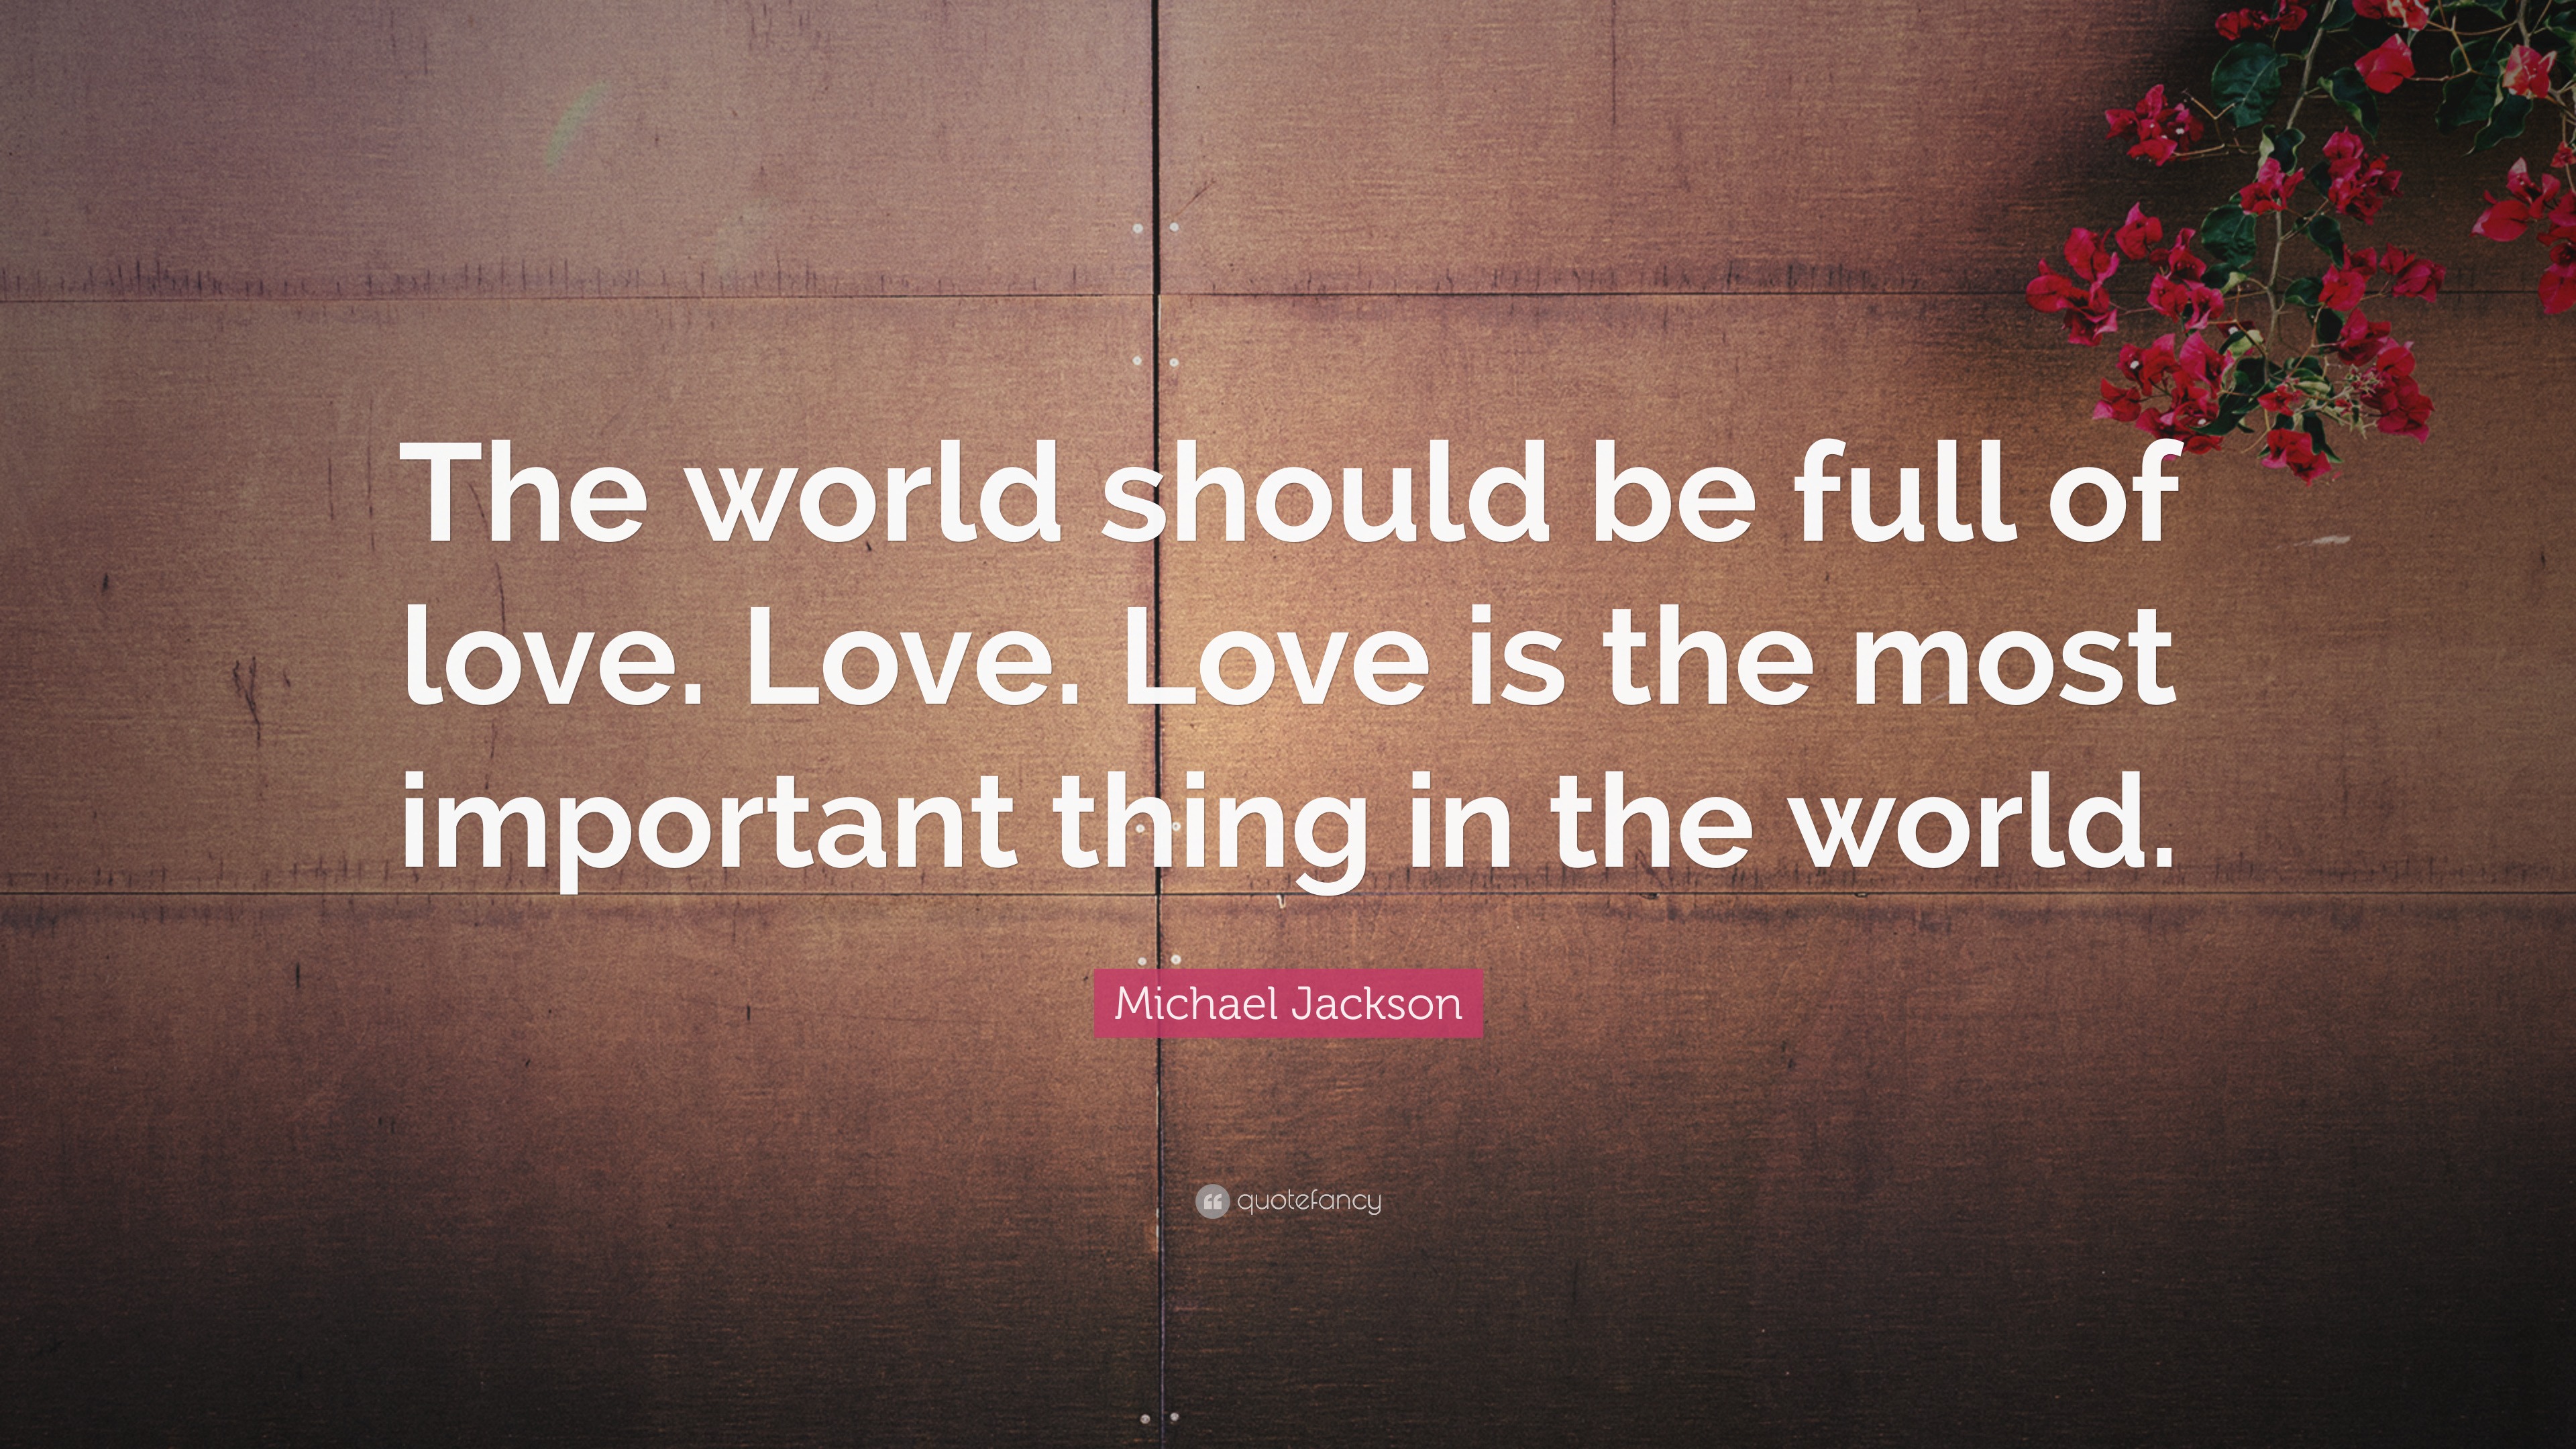 Michael Jackson Quote: “The world should be full of love. Love. Love is ...